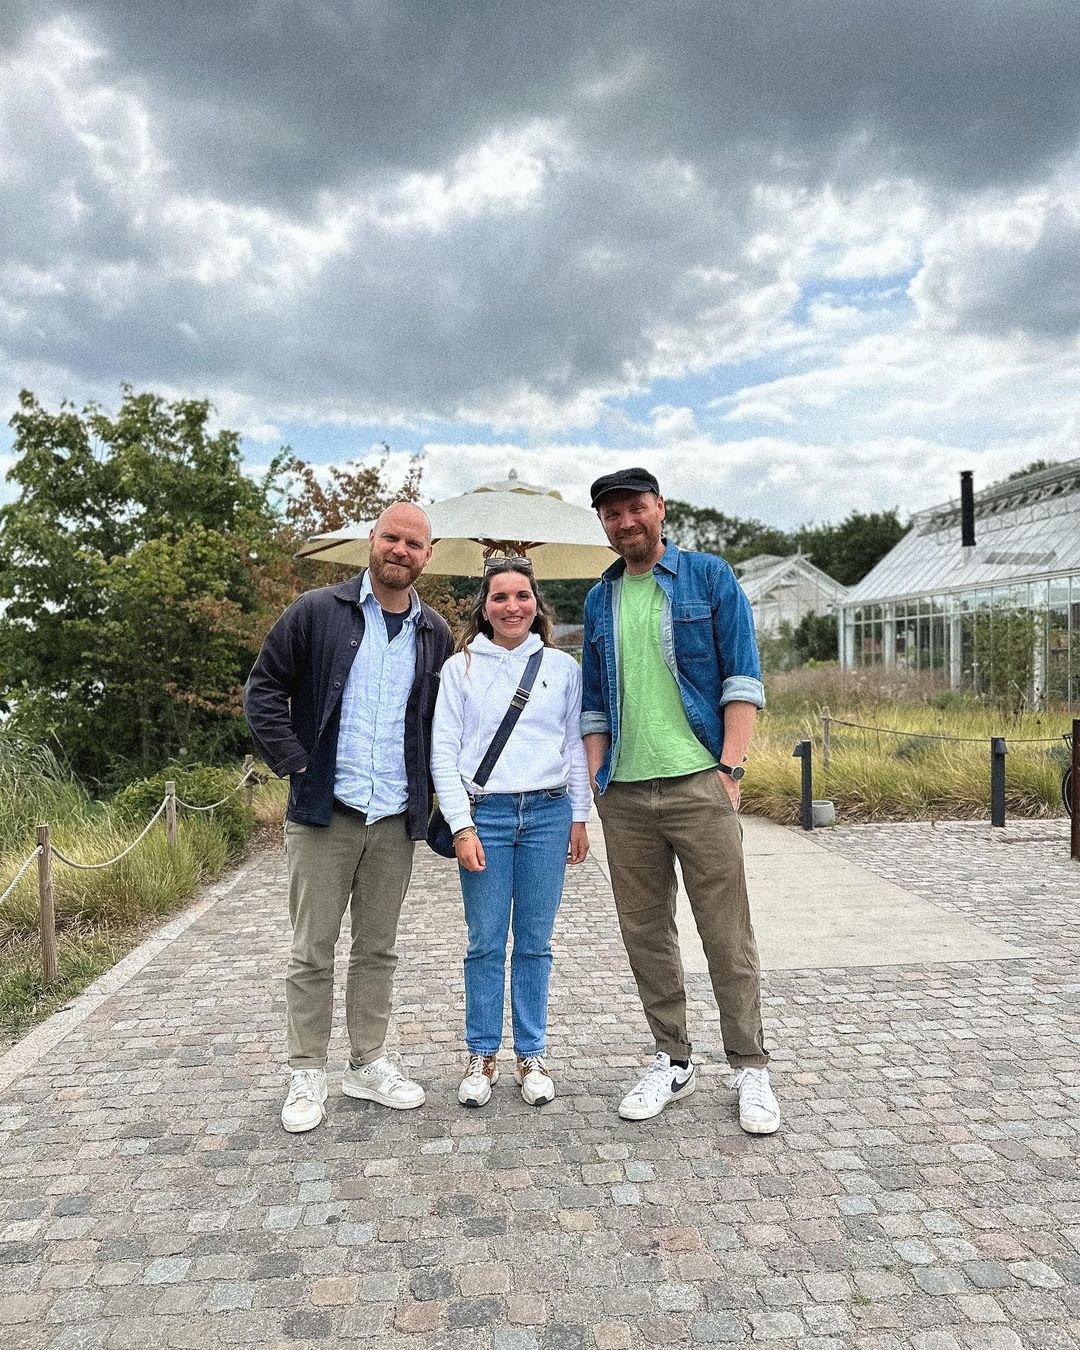 Coldplaying on X: More of Will Champion and Jonny Buckland with a fan  today in Gothenburg 🇸🇪 💚